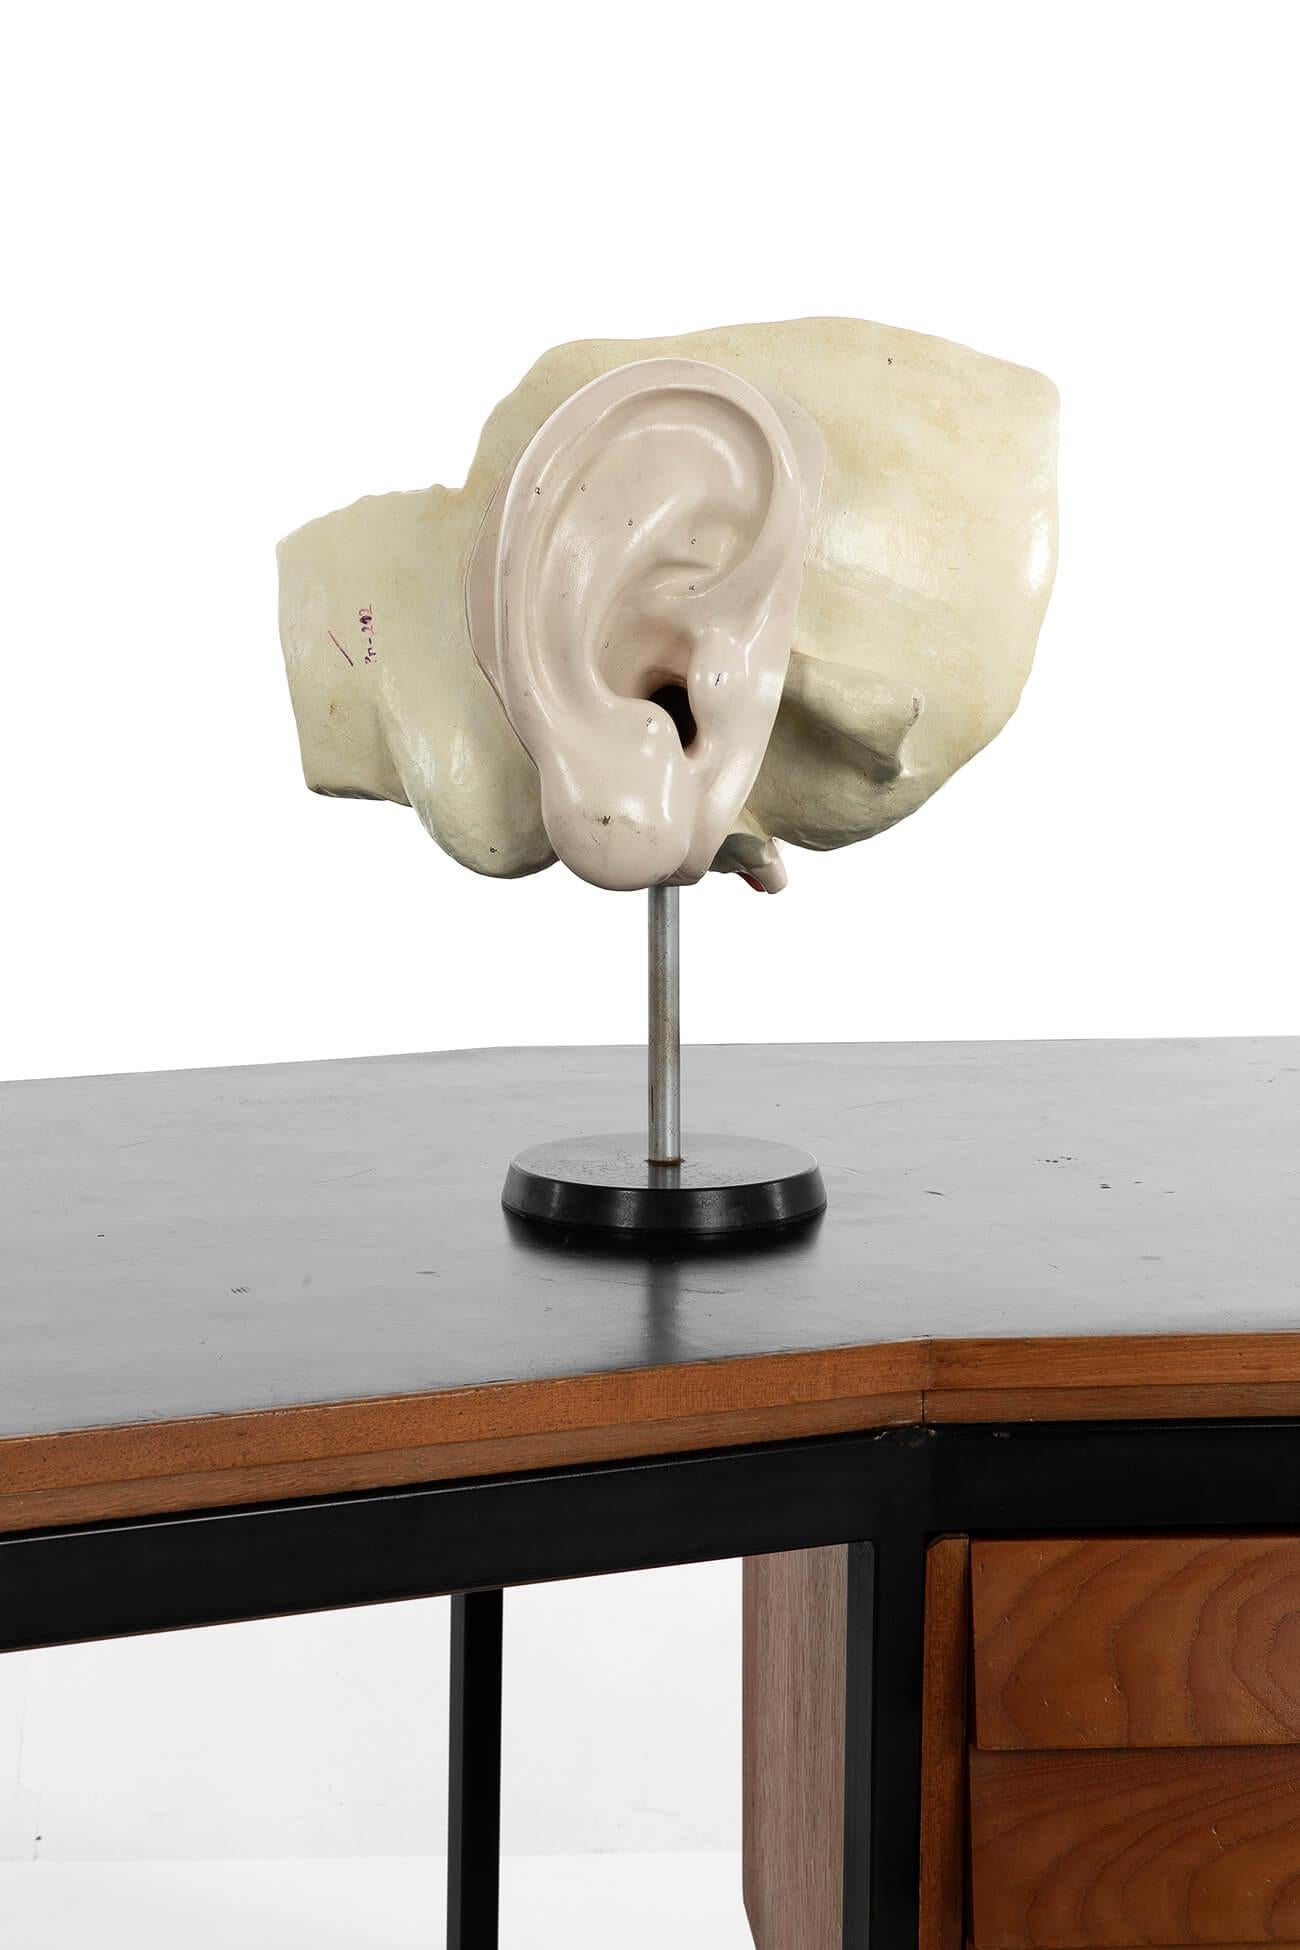 A rare plaster model of the human ear poised on a wooden stand.

The model is made by renowned German manufacturer, SOMSO.

This particular model is rare as it shows in incredible detail the removable eardrum, hammer, labyrinth and cochlea.

A